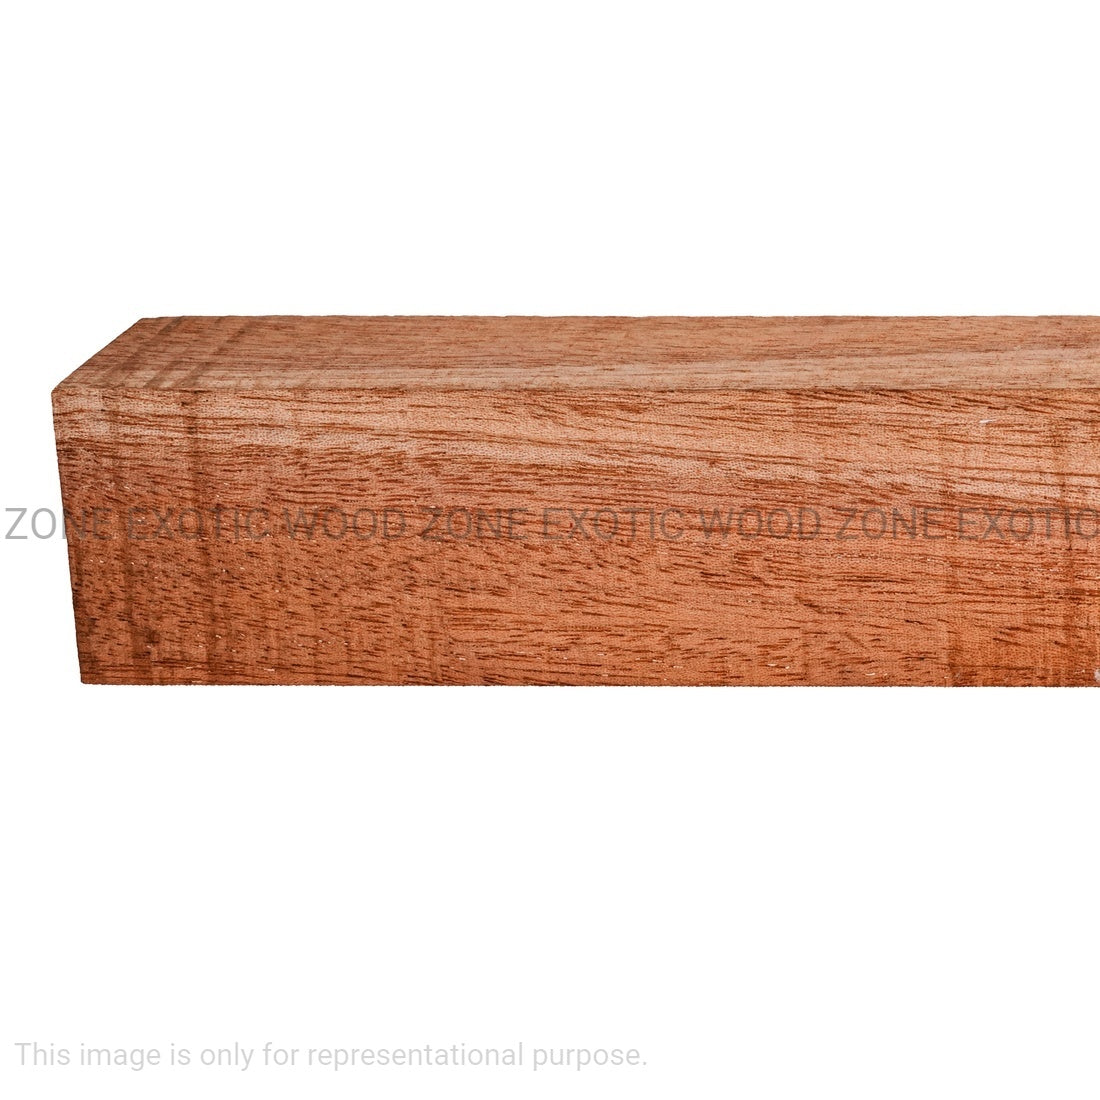 Pack of 2, African Mahogany Turning Wood Blanks 1-1/2 x 1-1/2 x 12 inches - Exotic Wood Zone - Buy online Across USA 